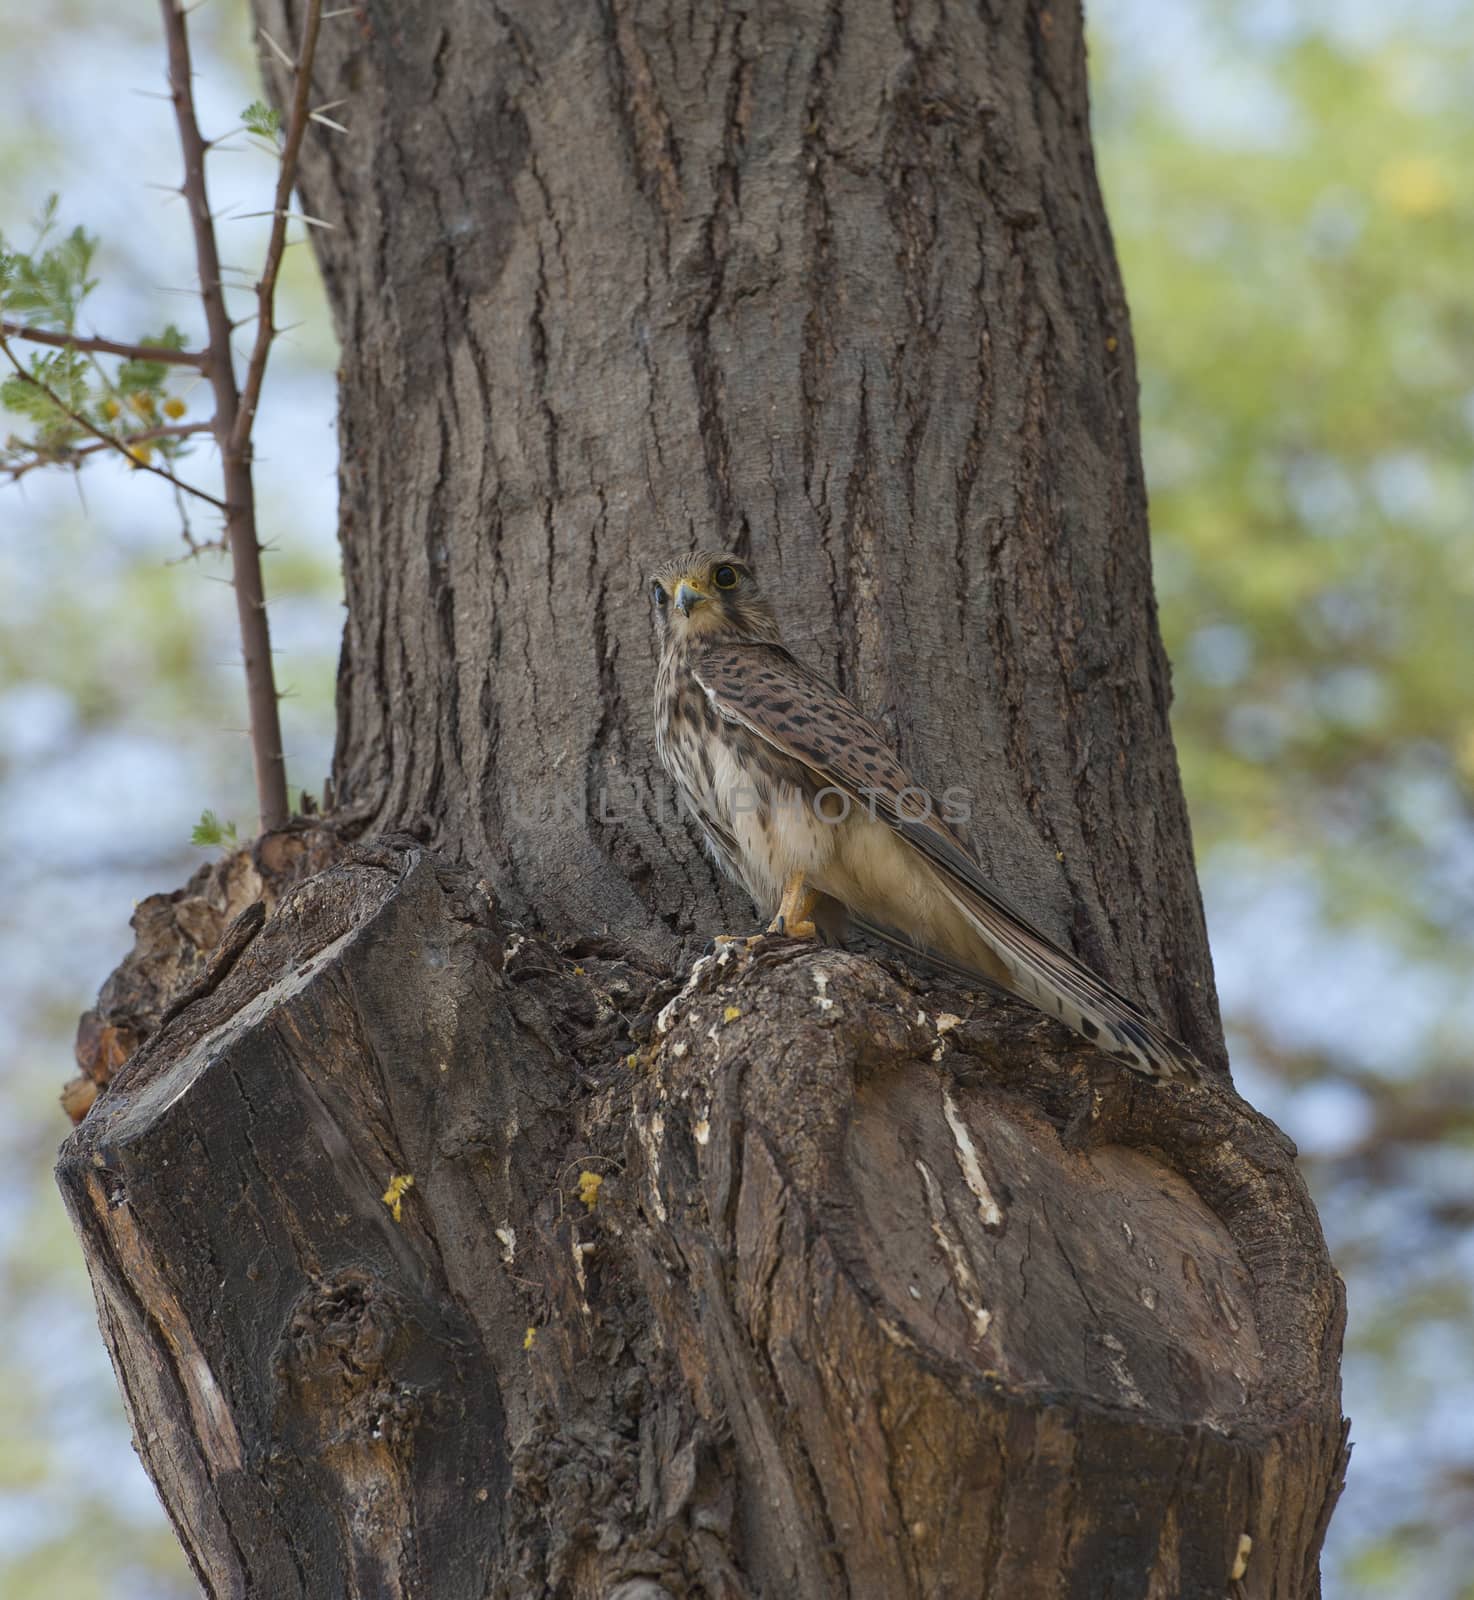 Female common kestrel perched on the trunk of a tree